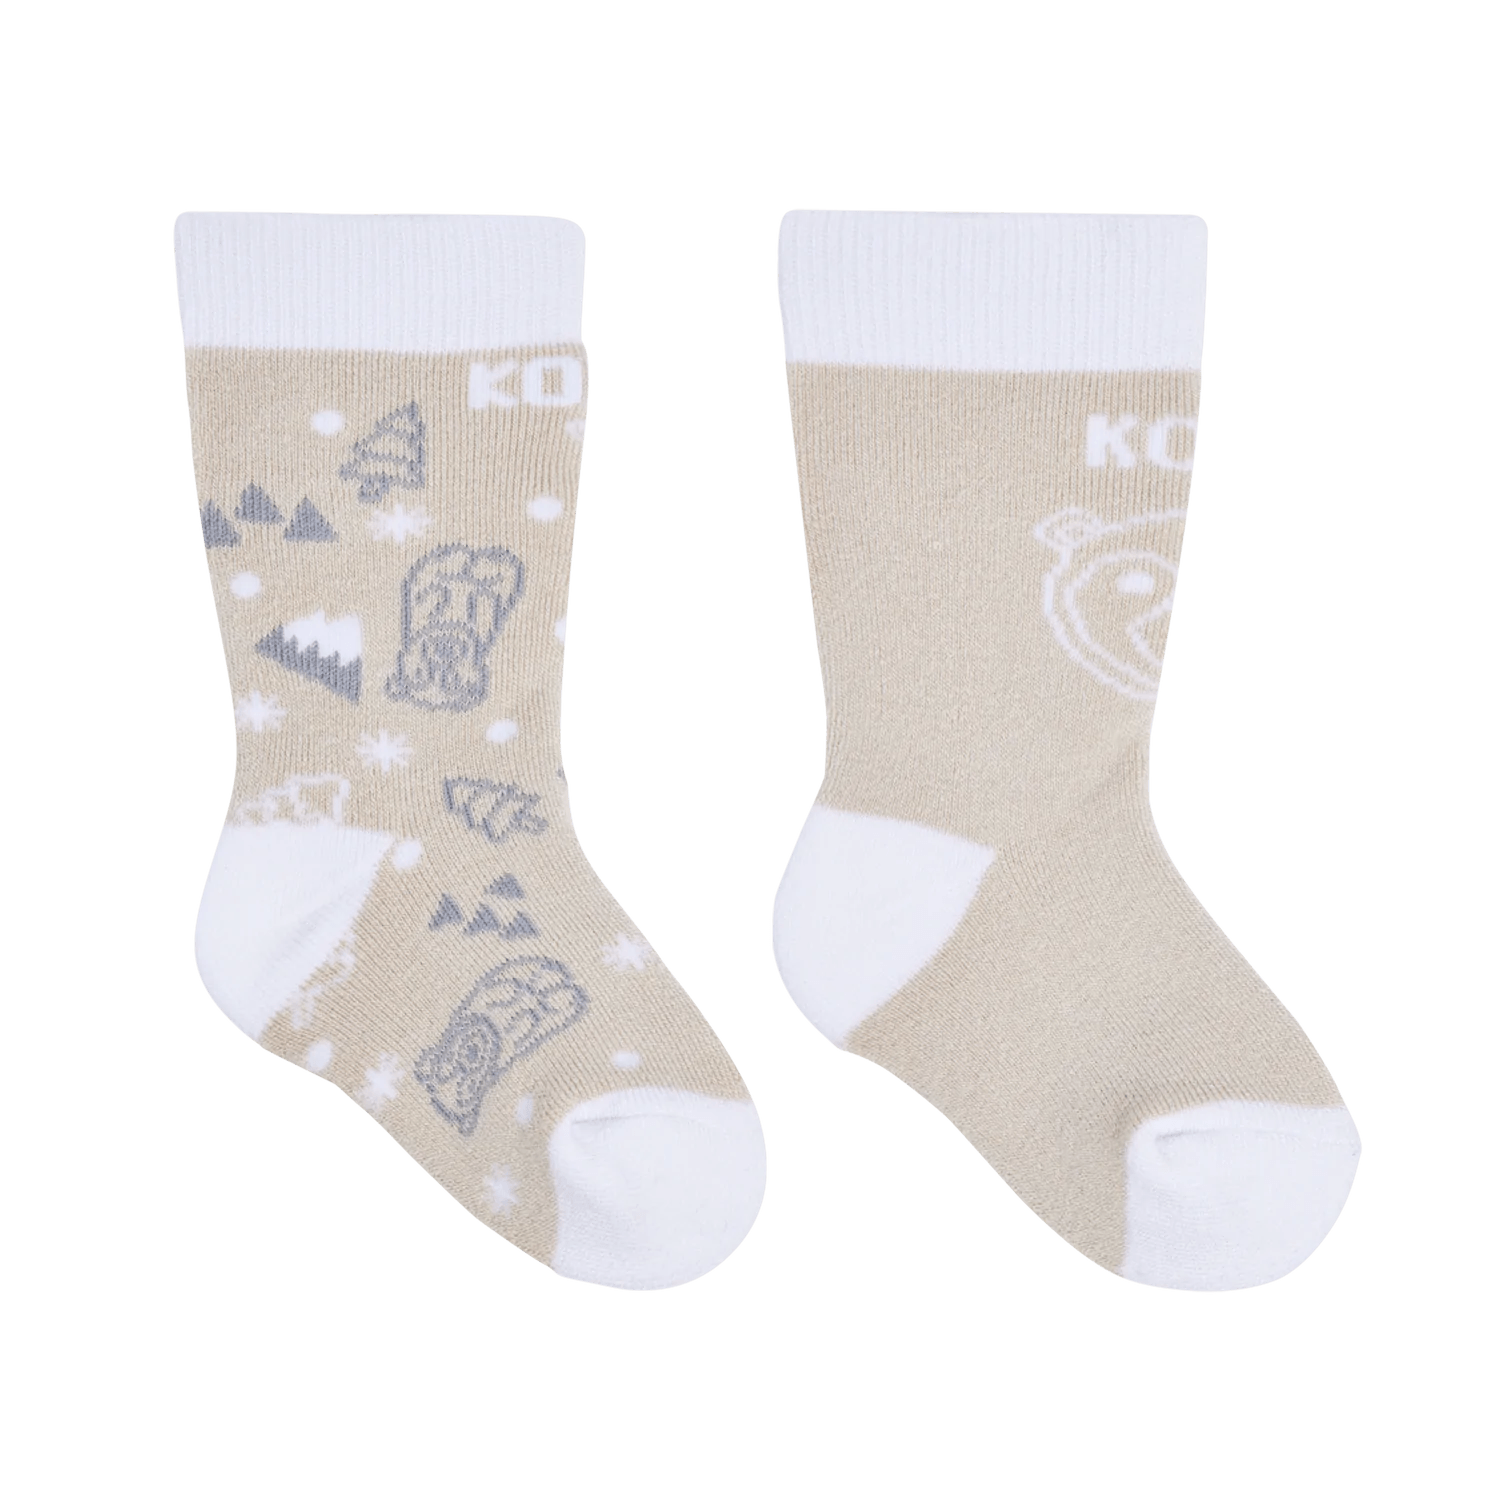 Kombi Adorable Twin Pack Infant Sock - Mountain Kids Outfitters